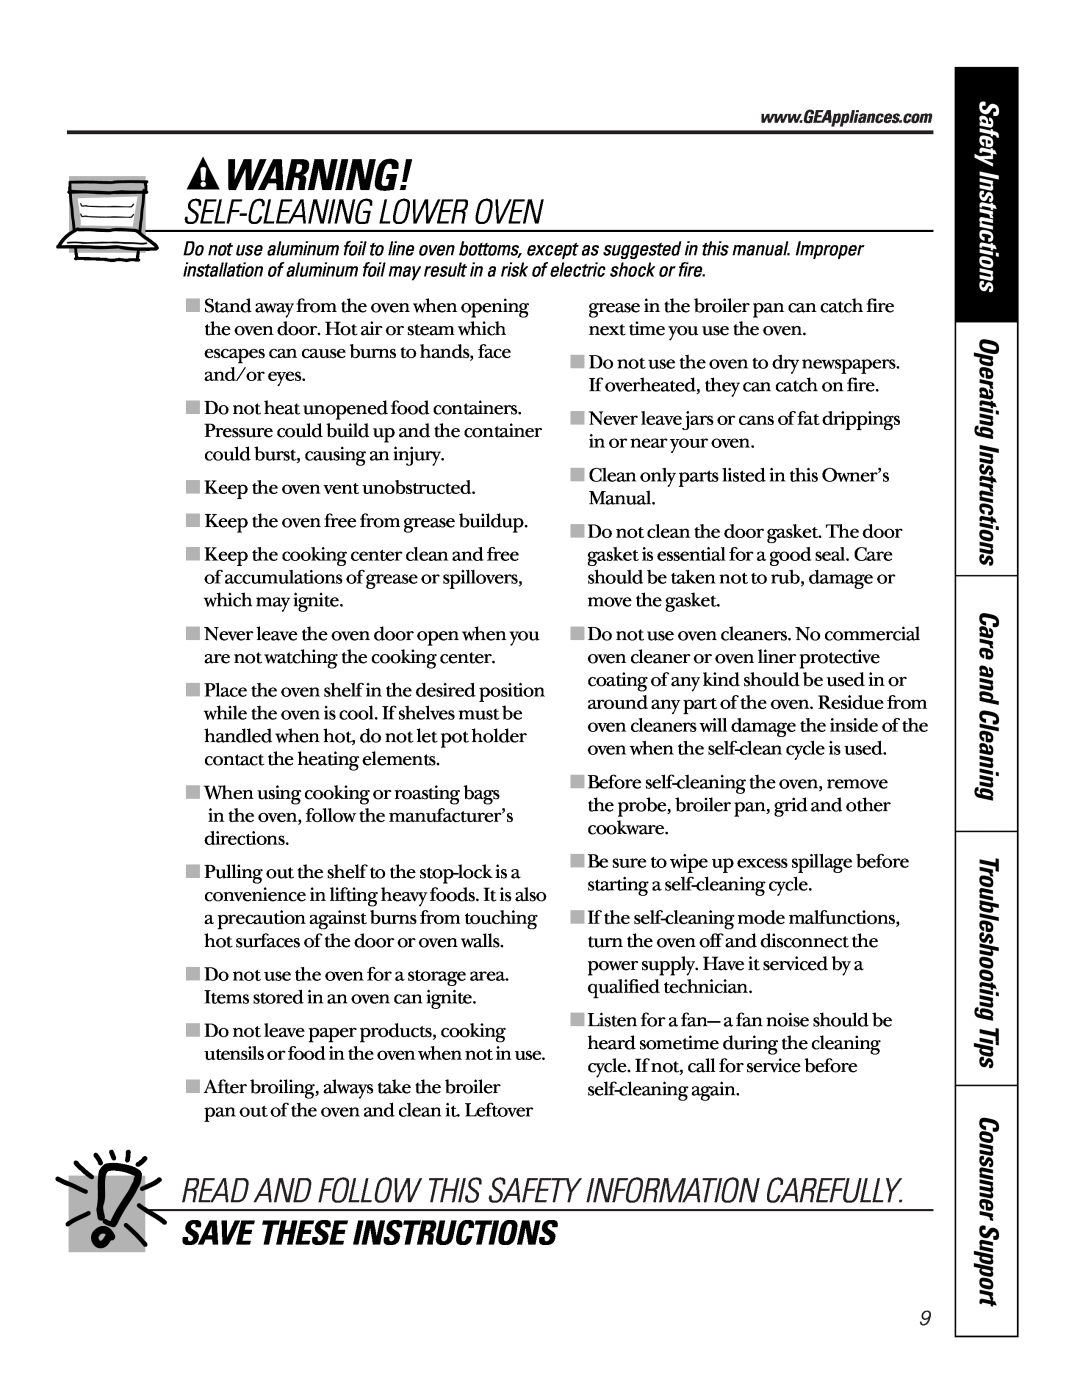 GE JTP95 Self-Cleaning Lower Oven, Save These Instructions, Support, Read And Follow This Safety Information Carefully 